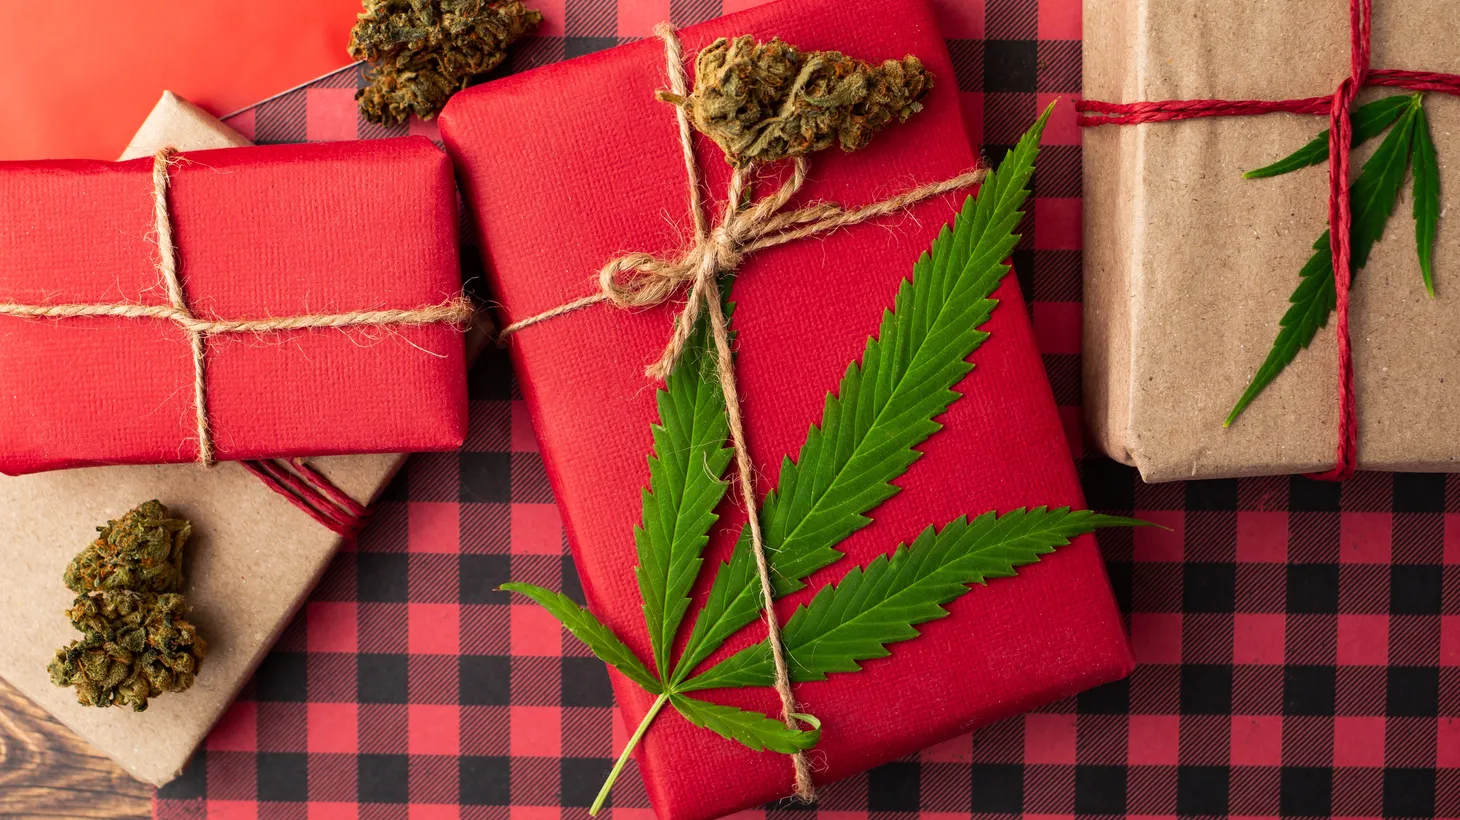 Add a subscription box, a high-tech pipe, or joint rolling guide to your stocking stuffers for the cannabis consumer in your life this holiday season, suggests Leafly Senior Editor David Downs.